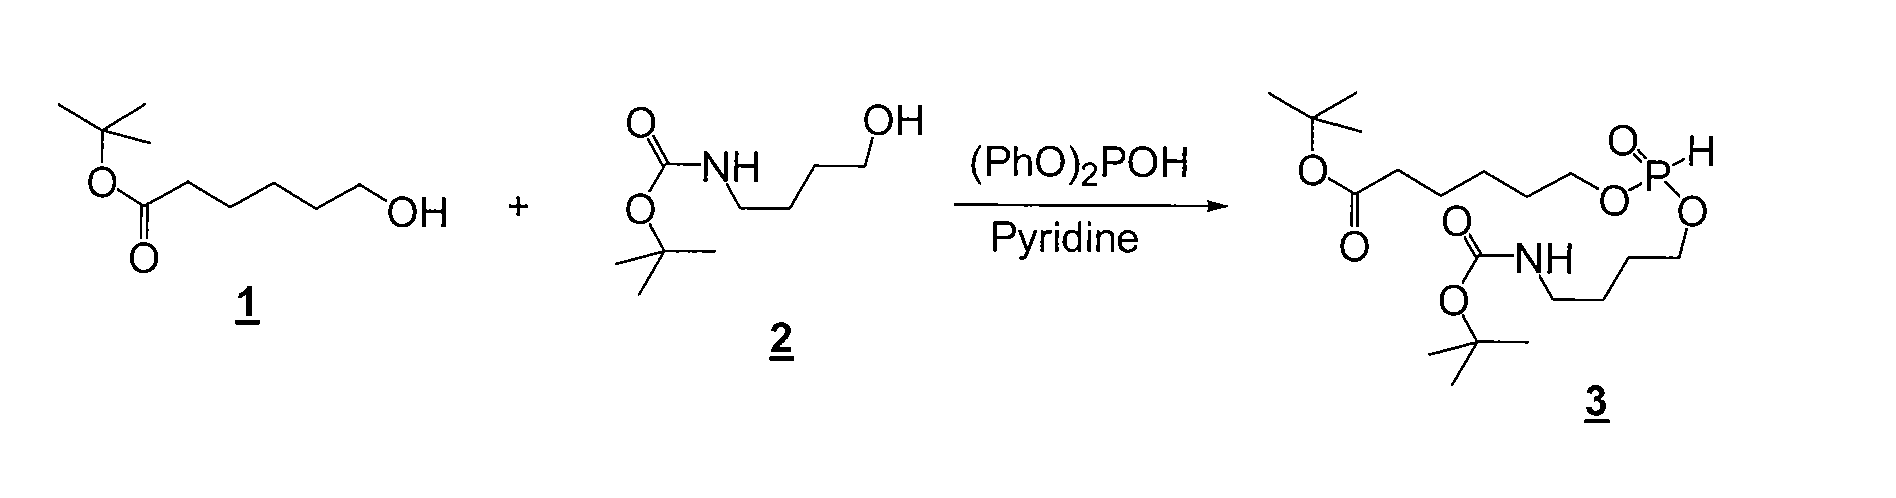 Amide-substituted xanthene dyes